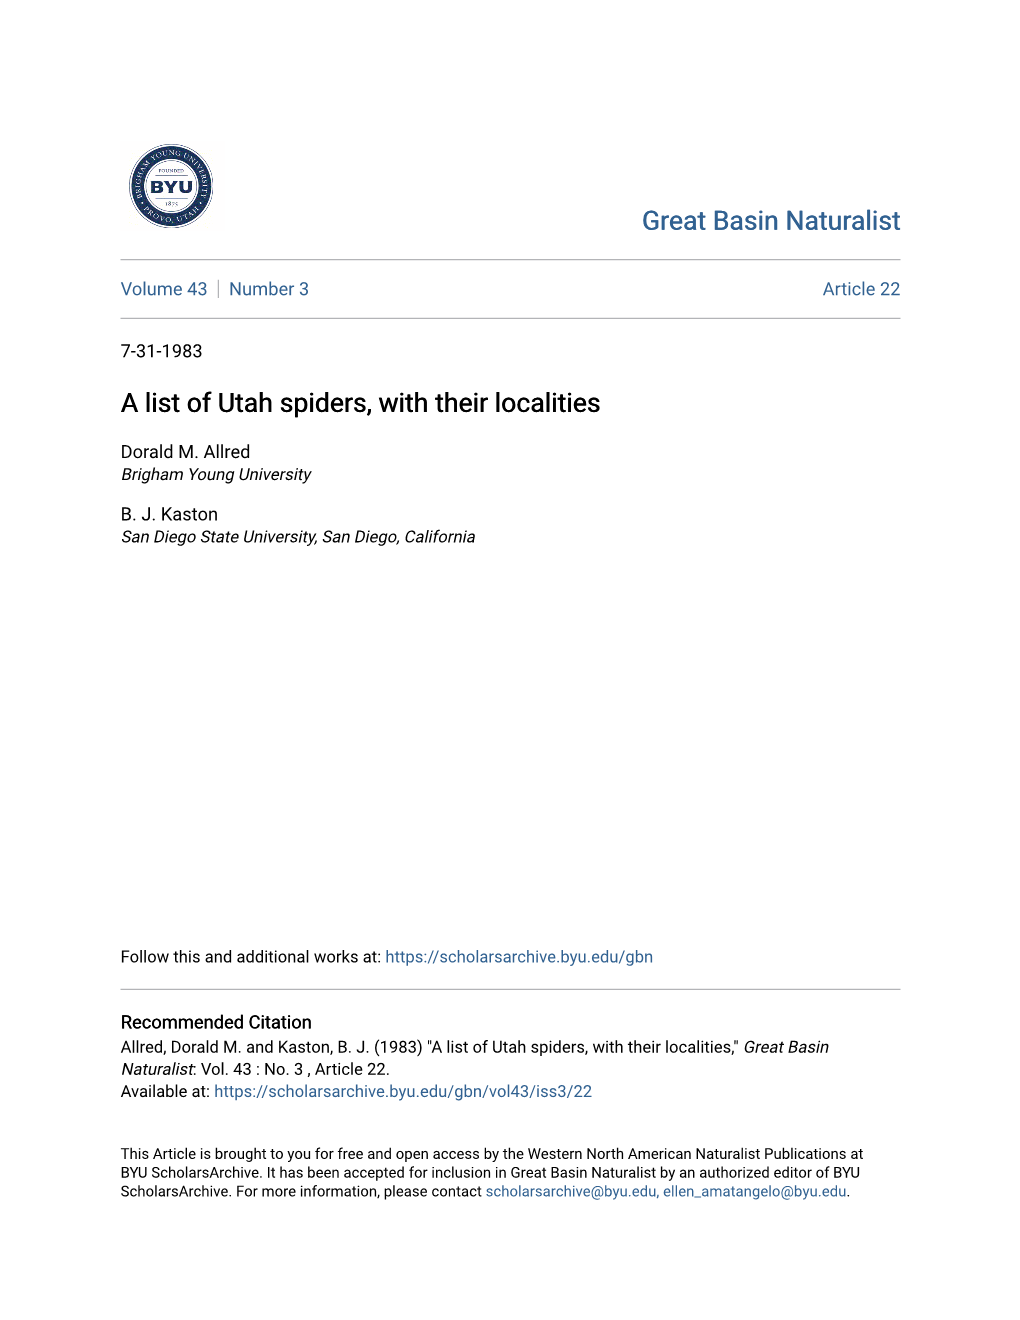 A List of Utah Spiders, with Their Localities